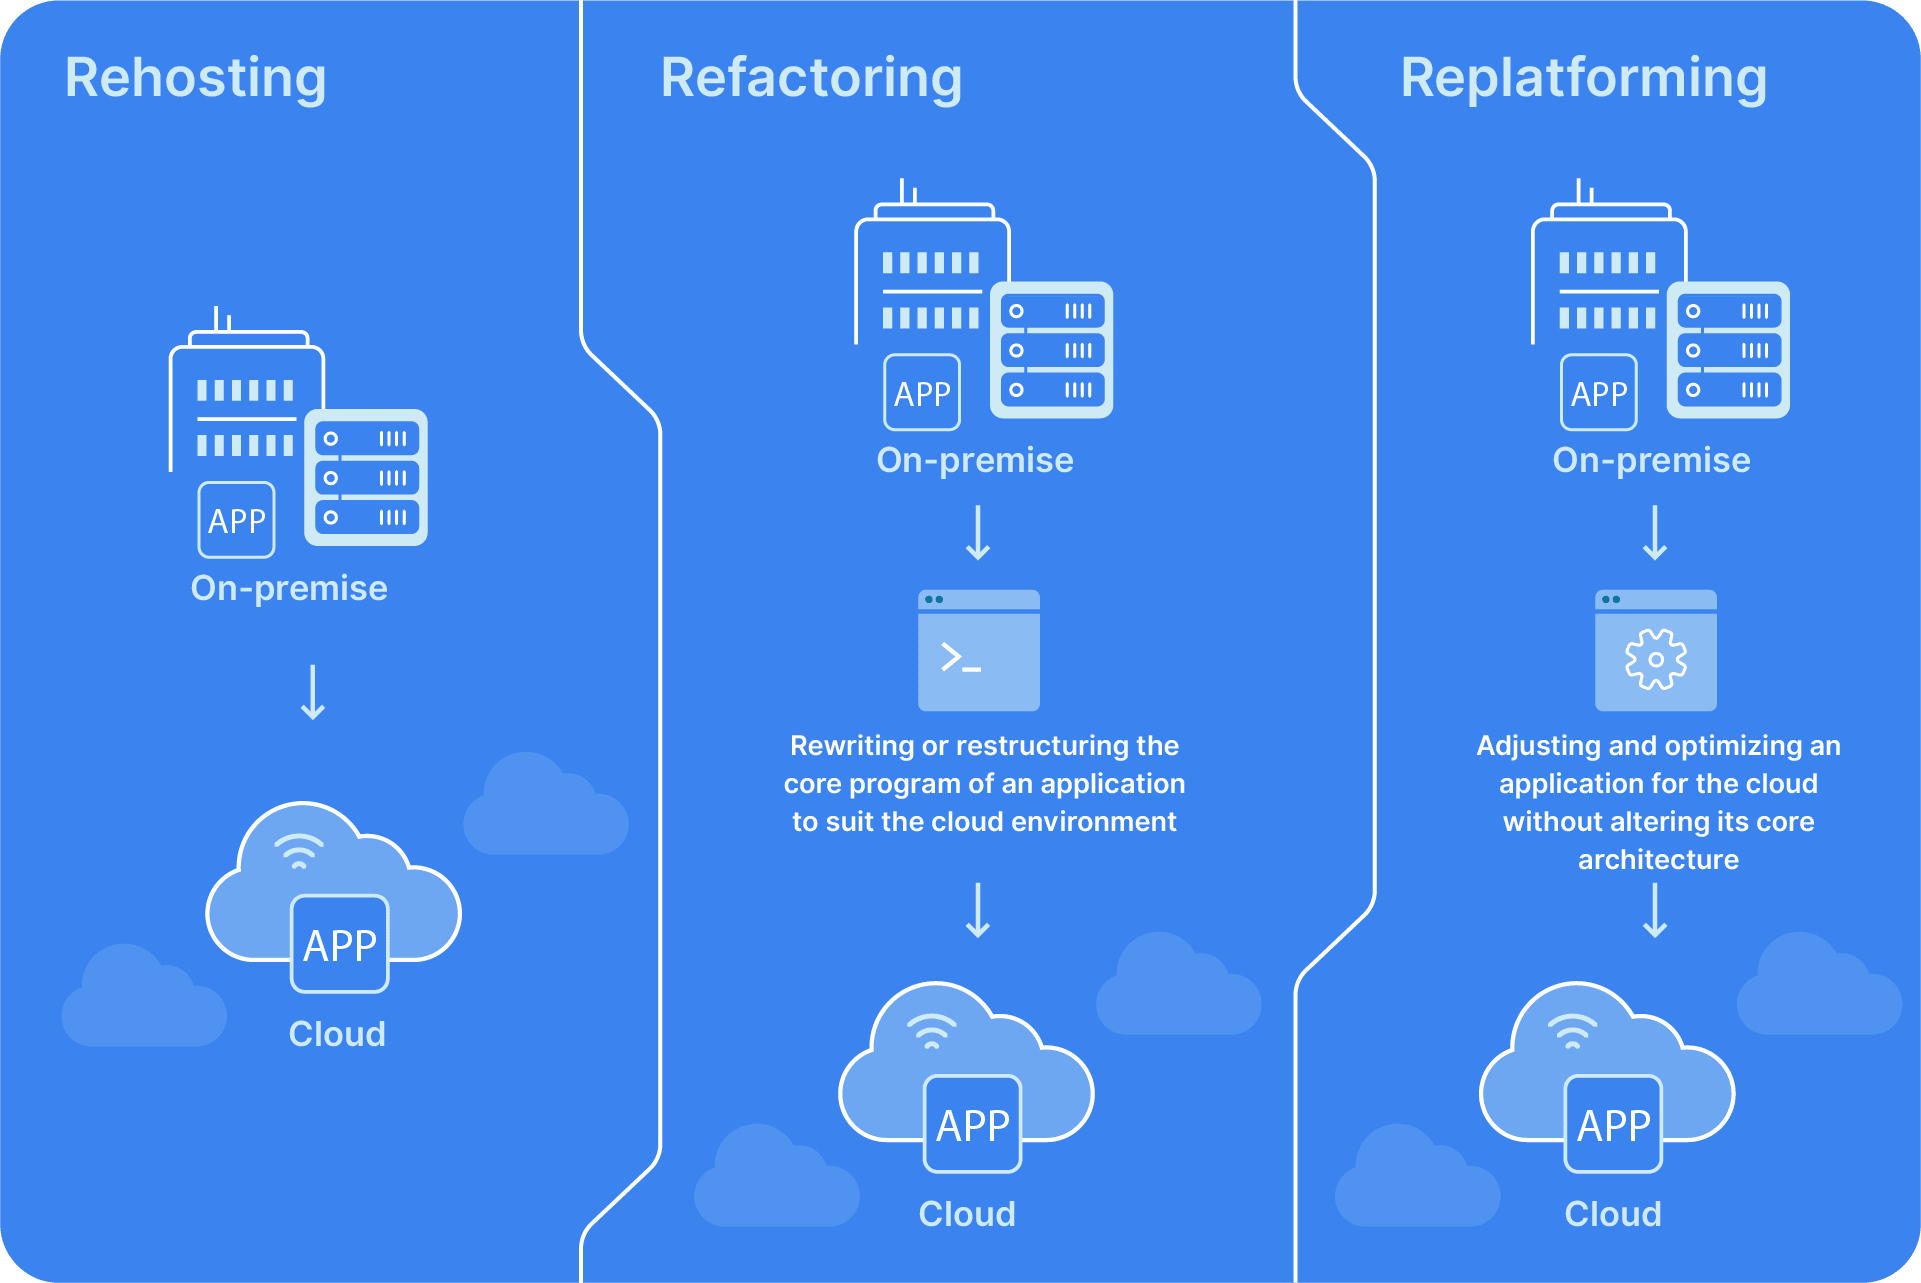 The difference between replatforming, refactoring, and rehosting cloud migration strategies.